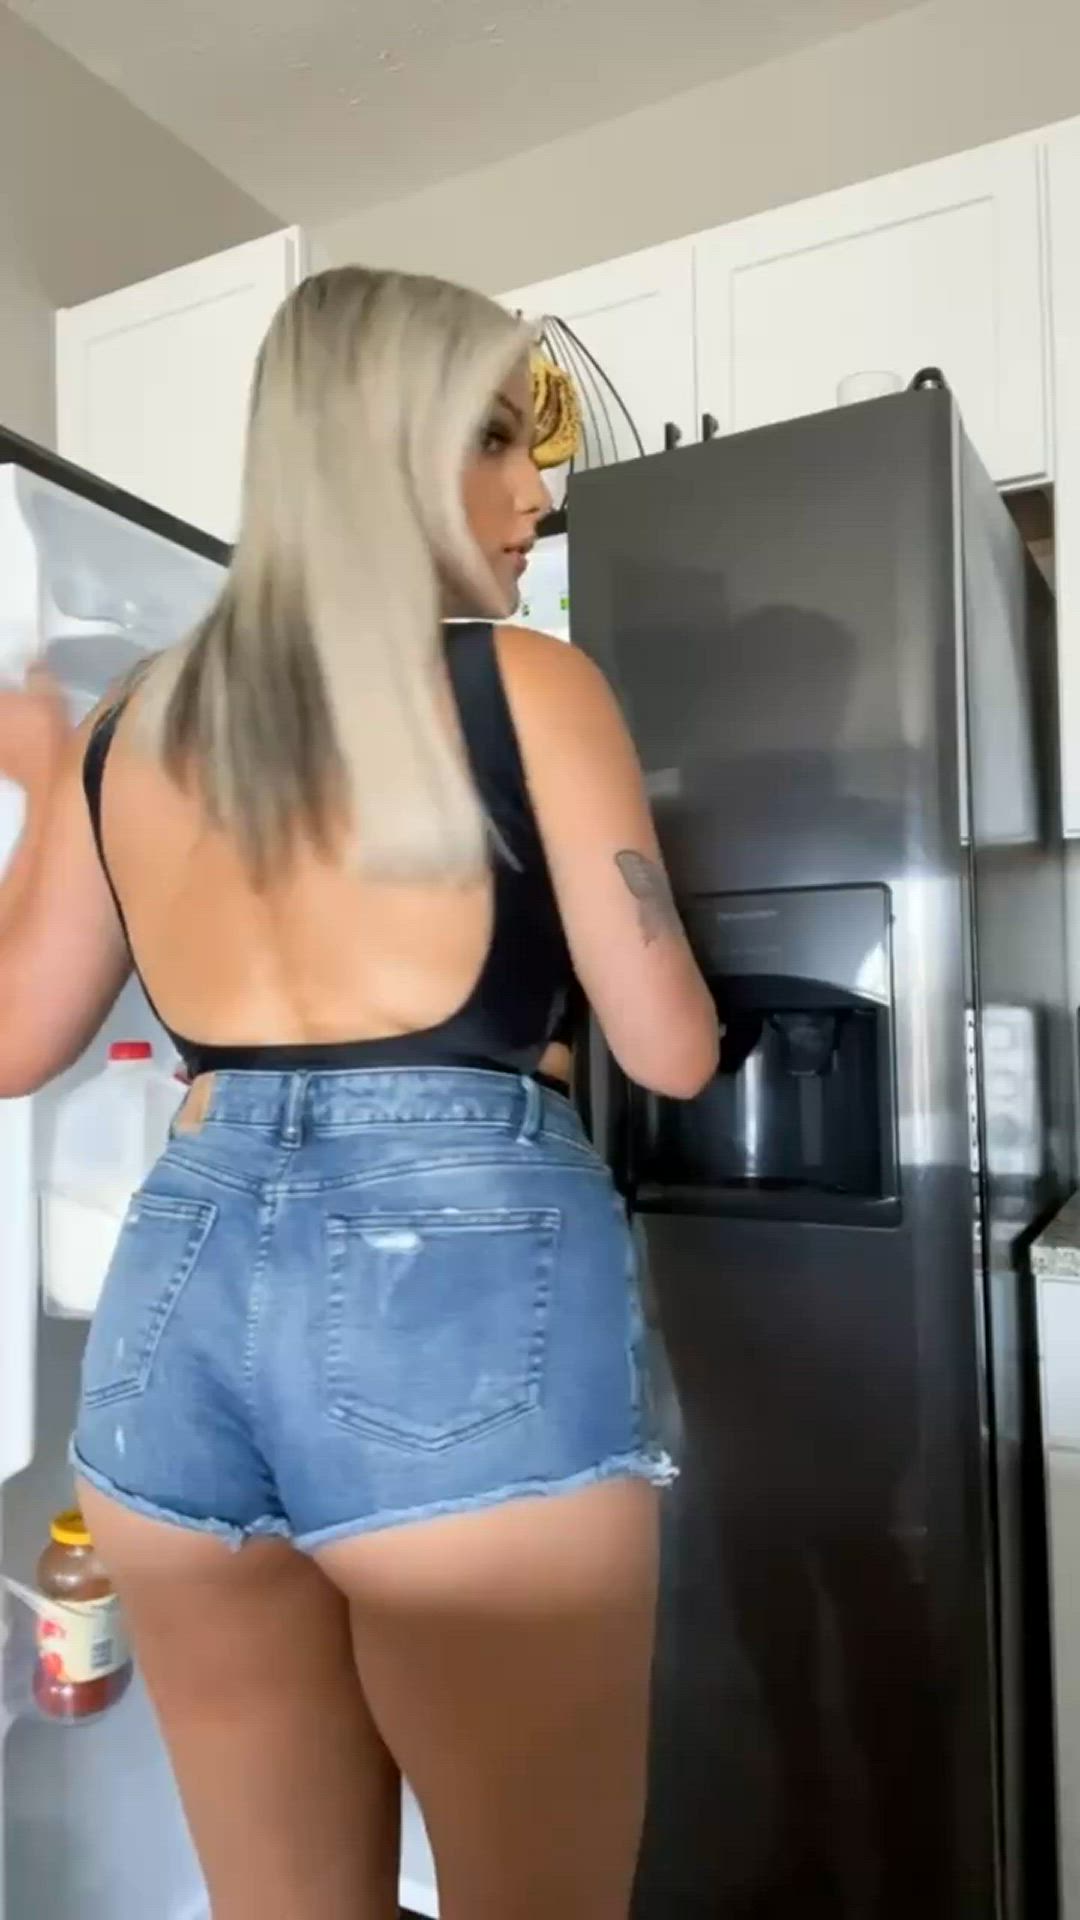 Ass porn video with onlyfans model thatbrazilianblonde <strong>@thatbrazilianblonde</strong>